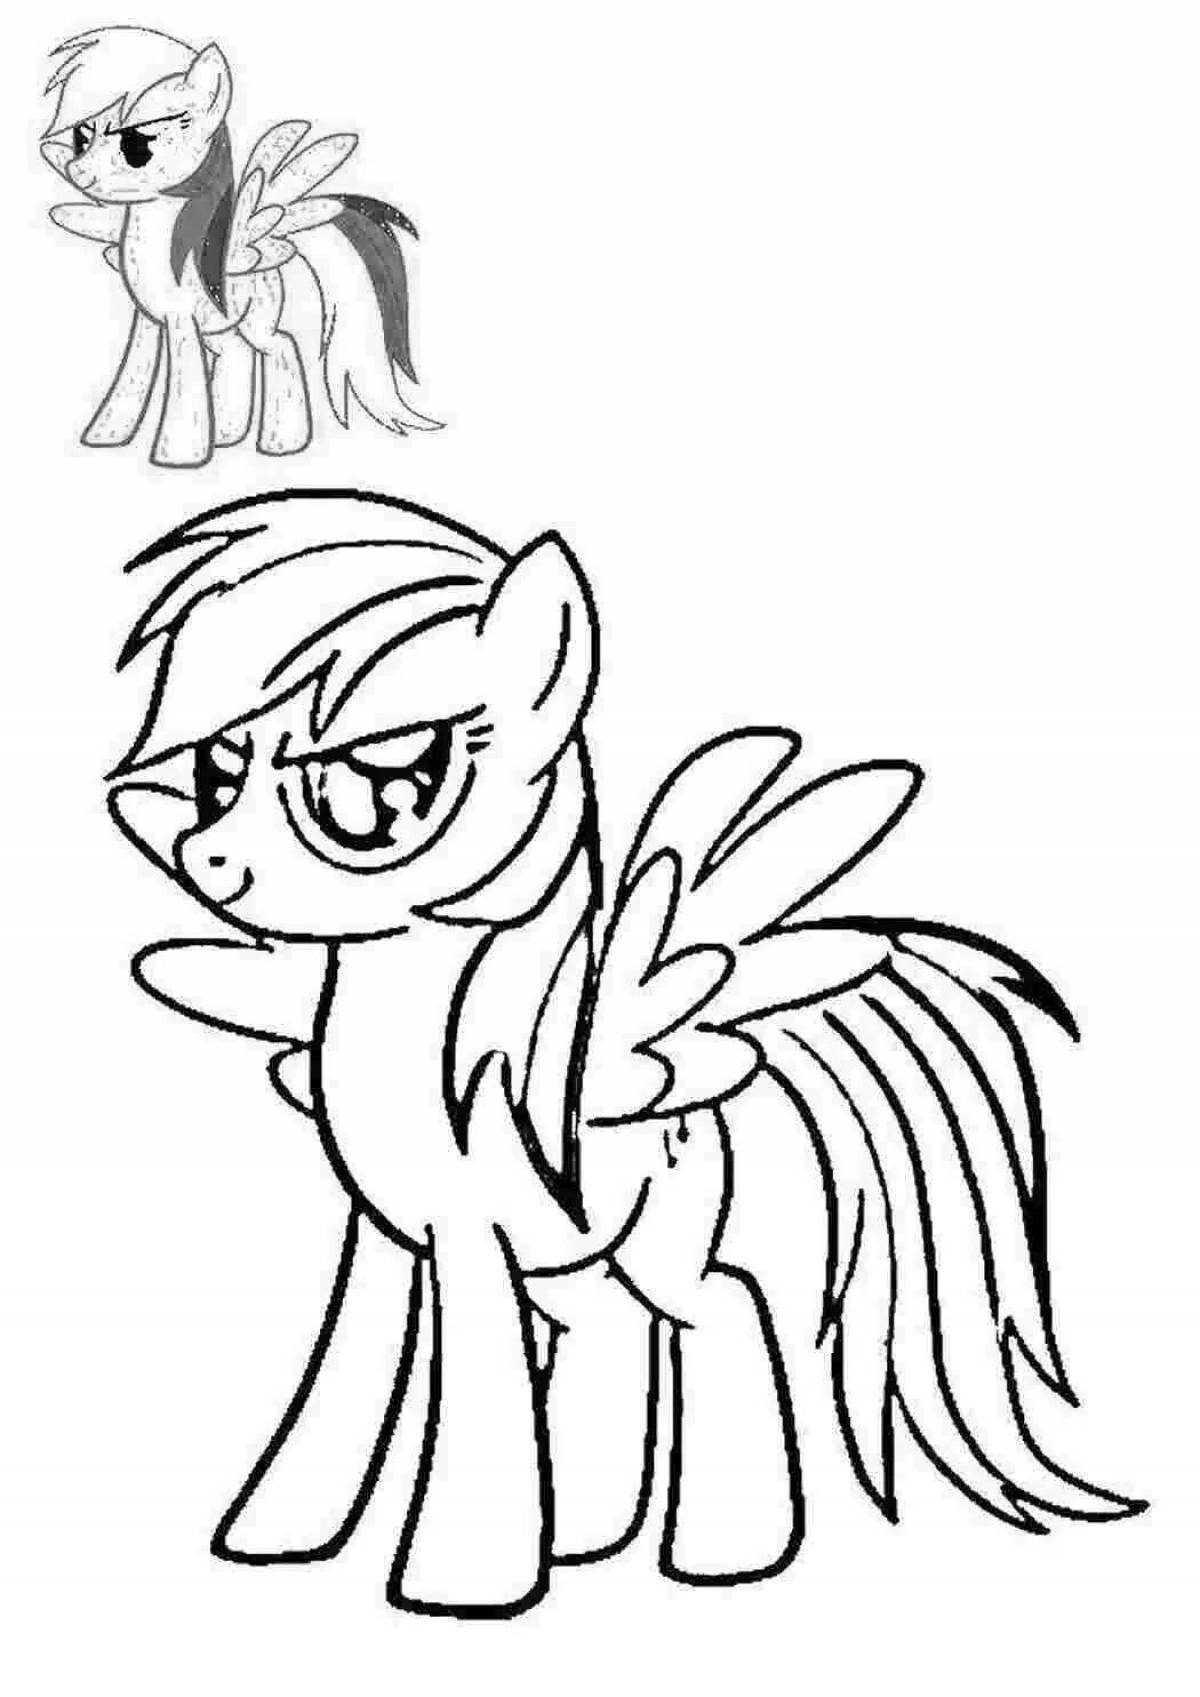 Colorful rainbow dash coloring page